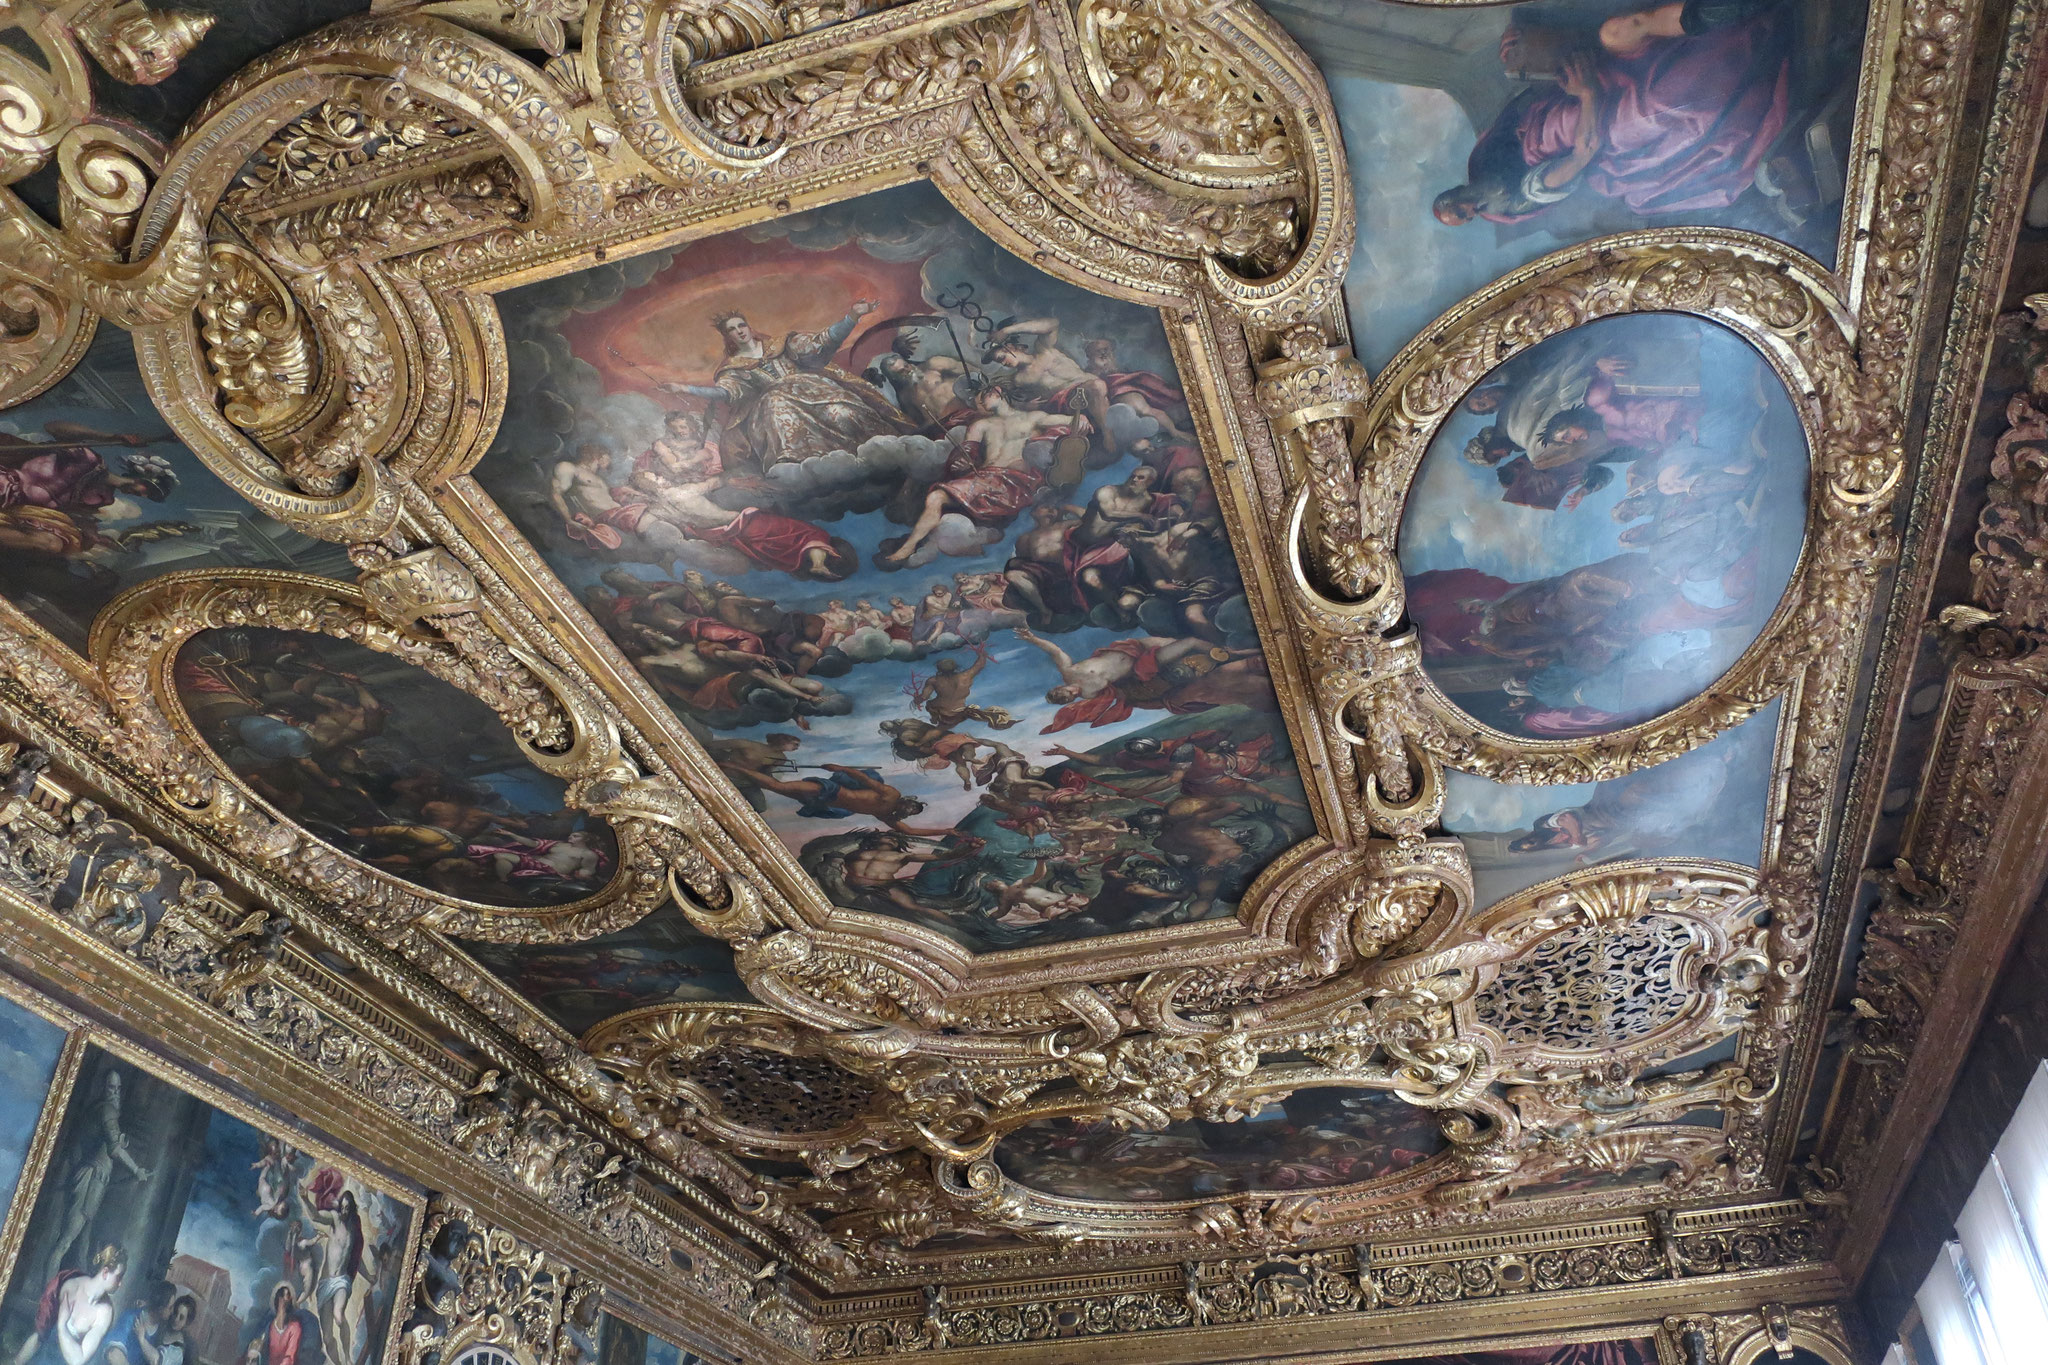  Tintoretto's "Venetian Glory" on the ceiling of the "Chamber of the Senators"